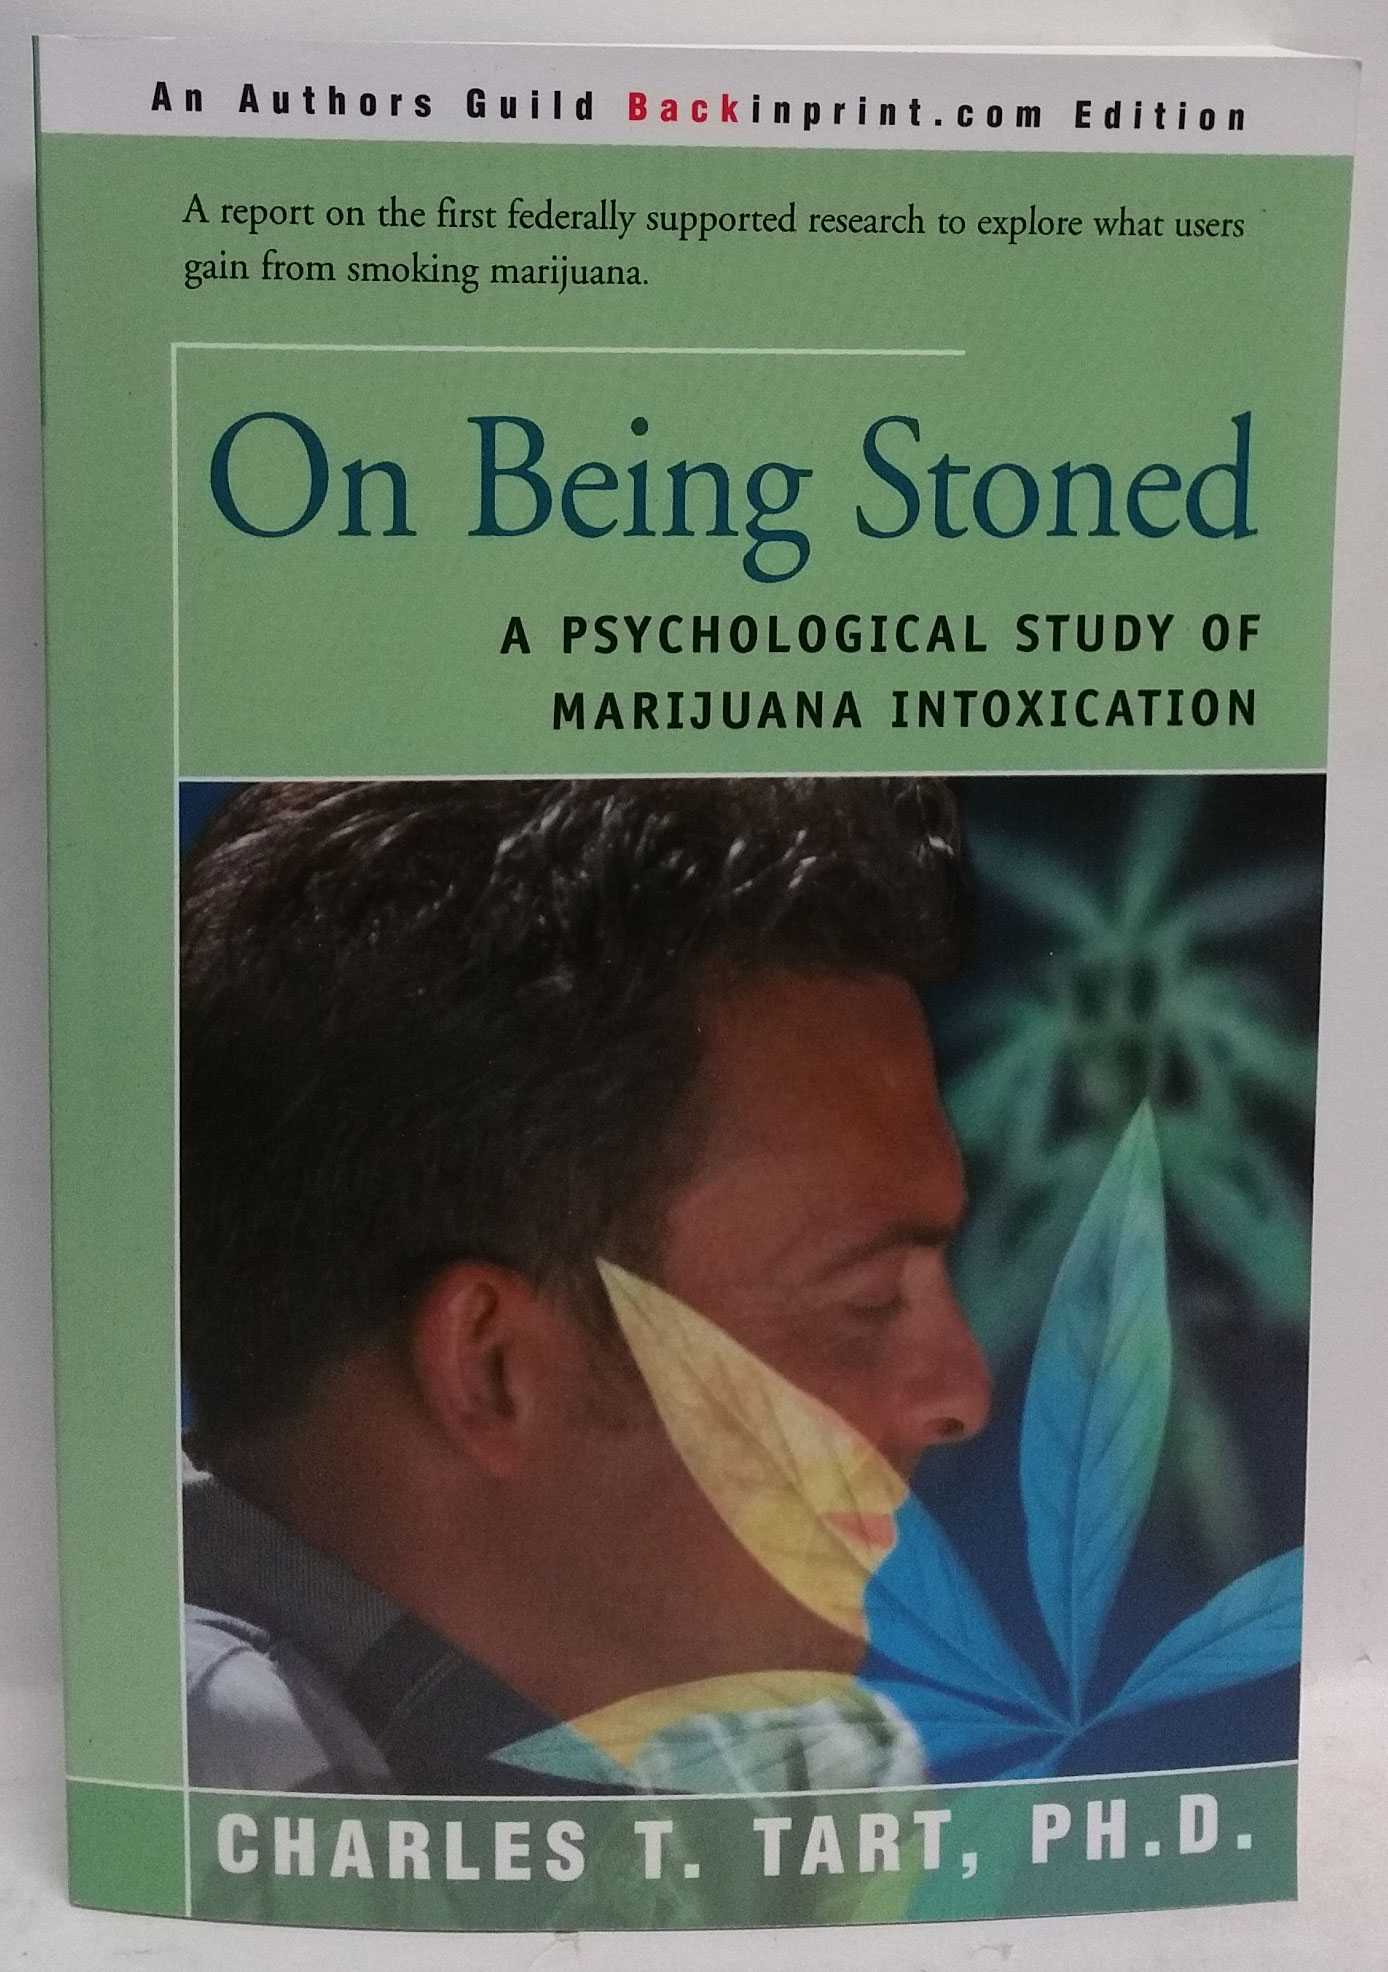 Charles T. Tart - On Being Stoned: A Psychological Study of Marijuana Intoxication